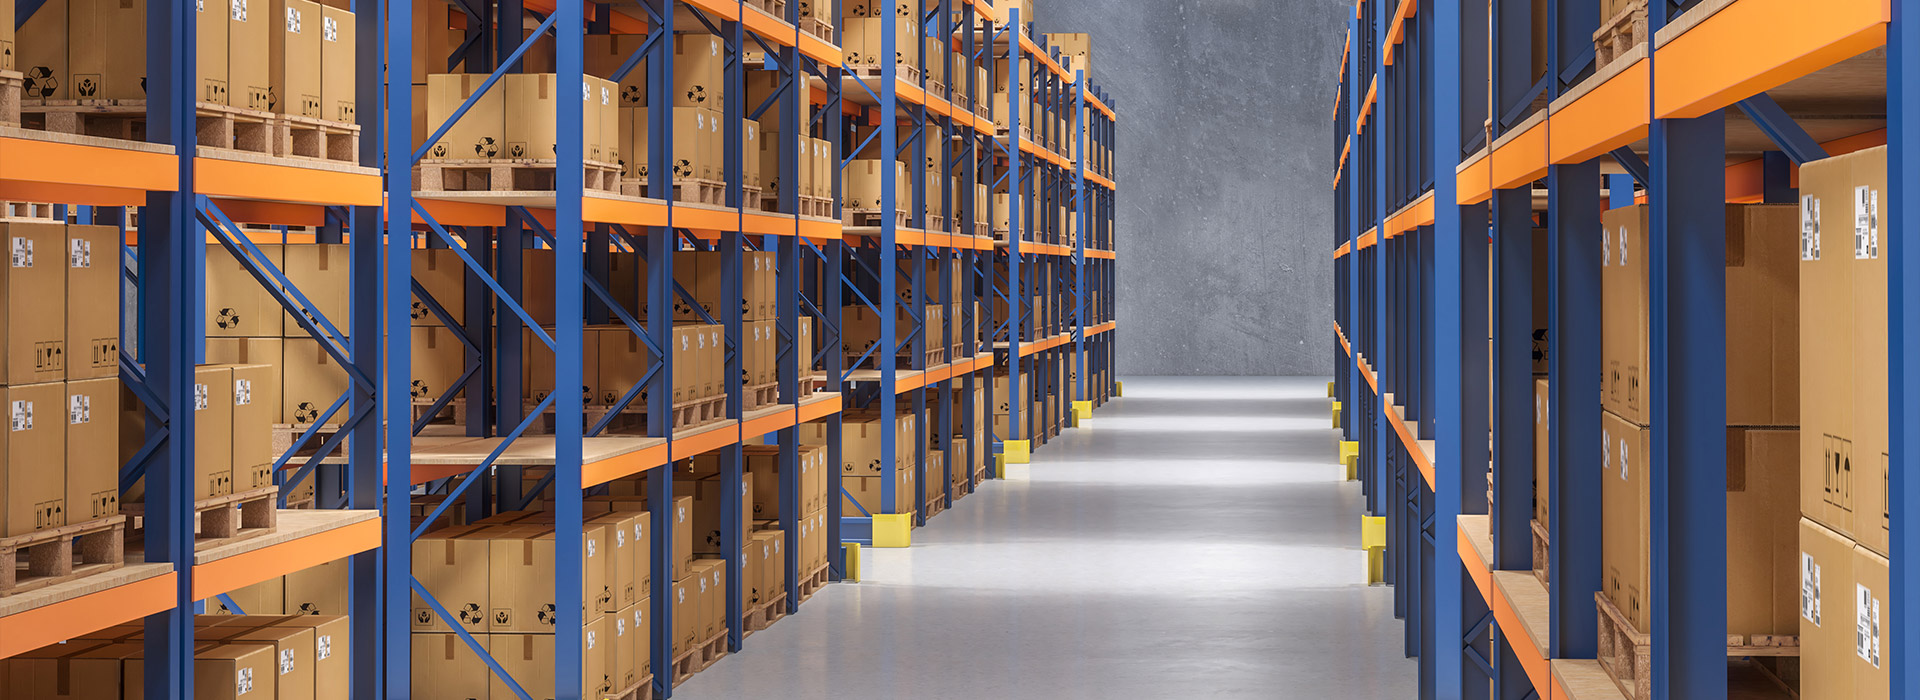 Pallet racks LAVA systems | Drive-In shelving system